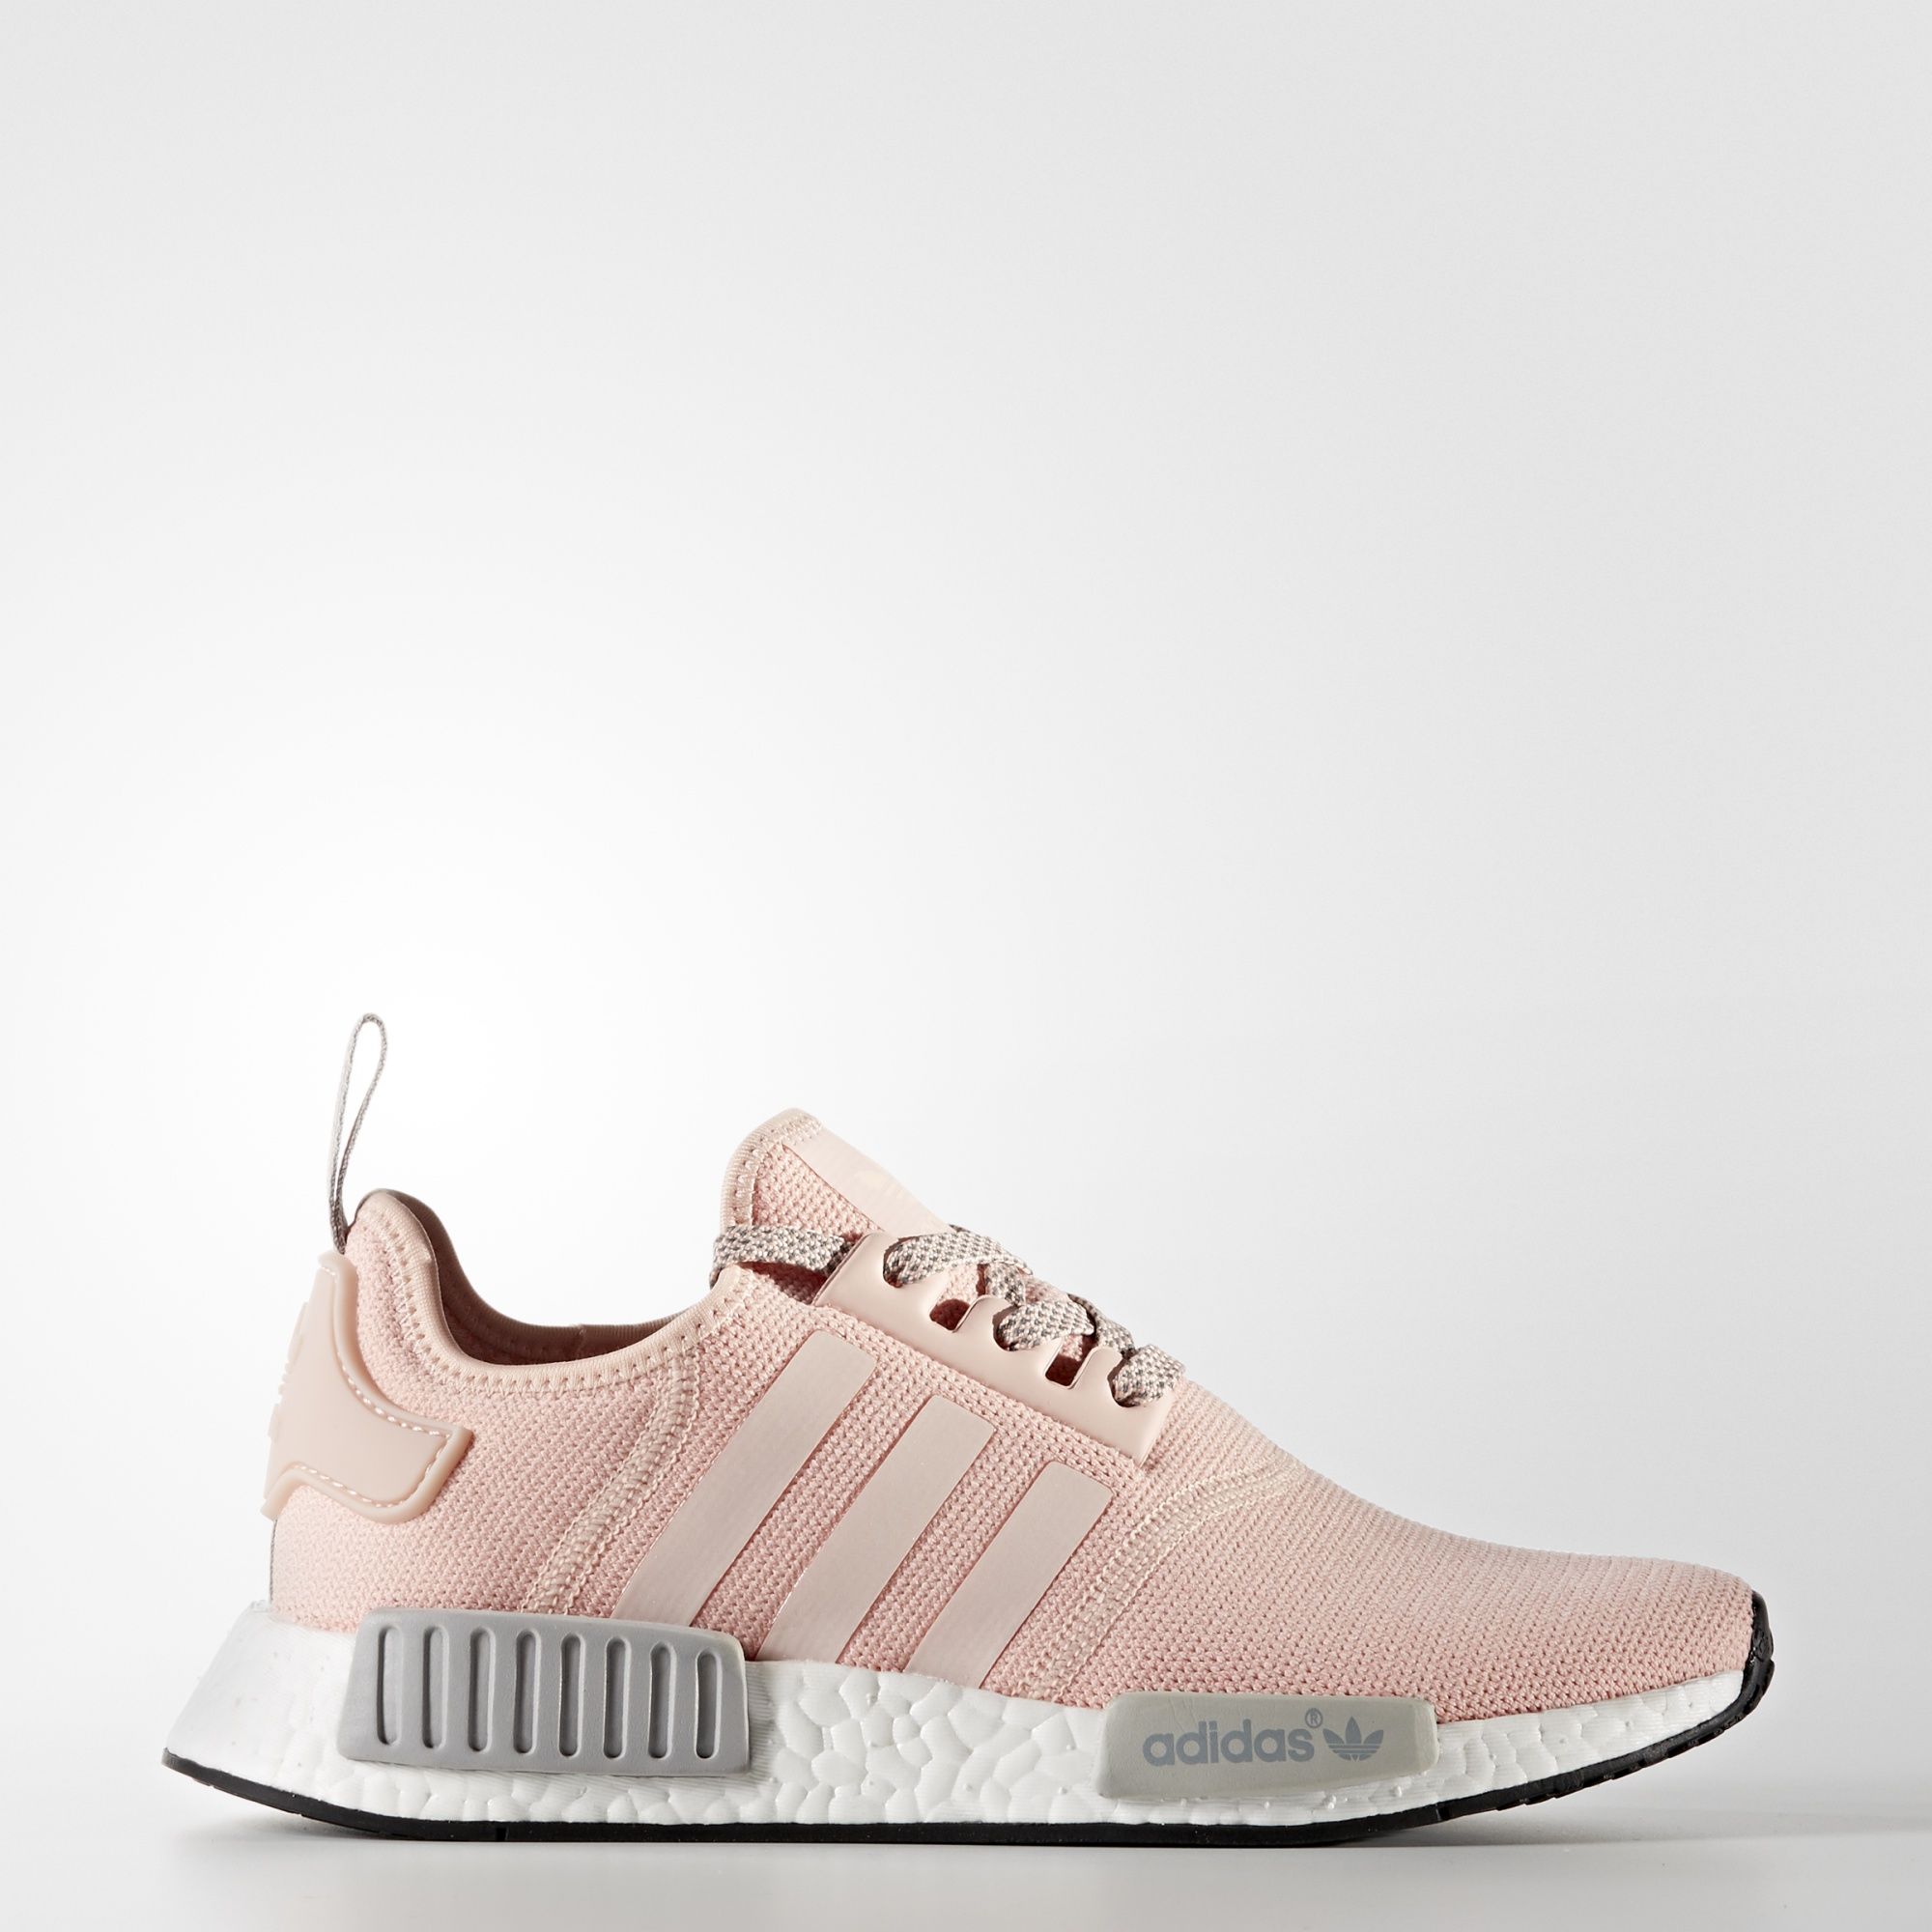 adidas-wmns-nmd_r1-vapour-pink-2